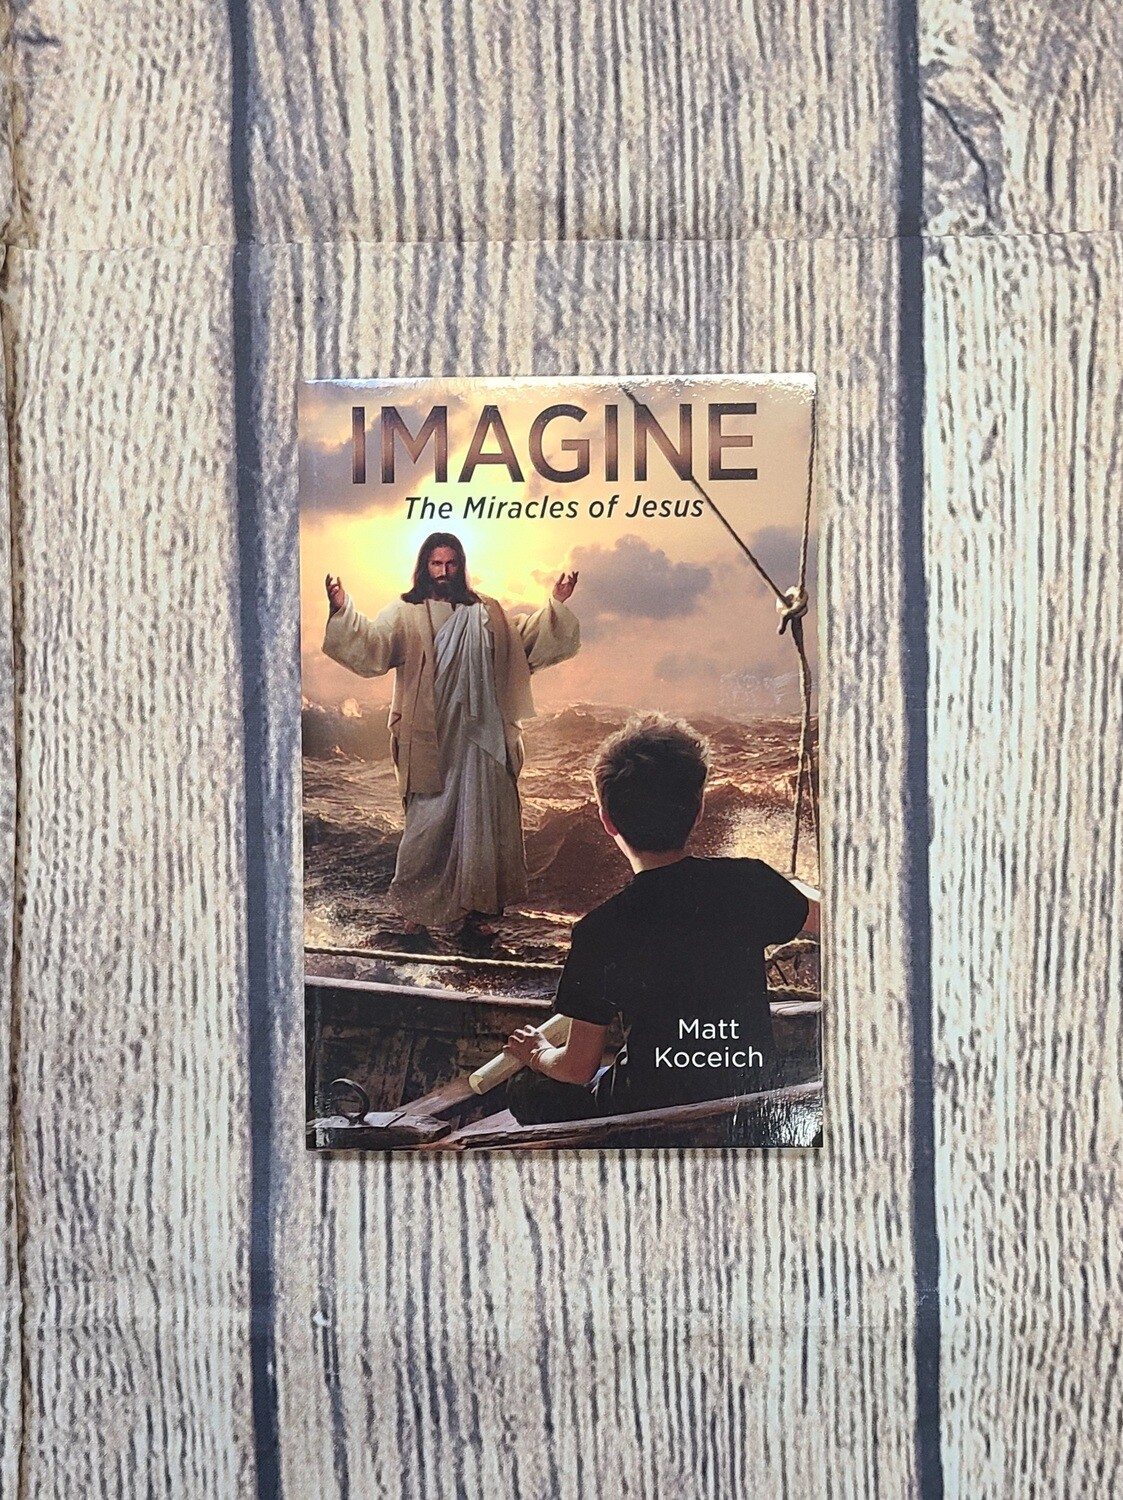 Imagine: The Miracles of Jesus by Matt Koceich